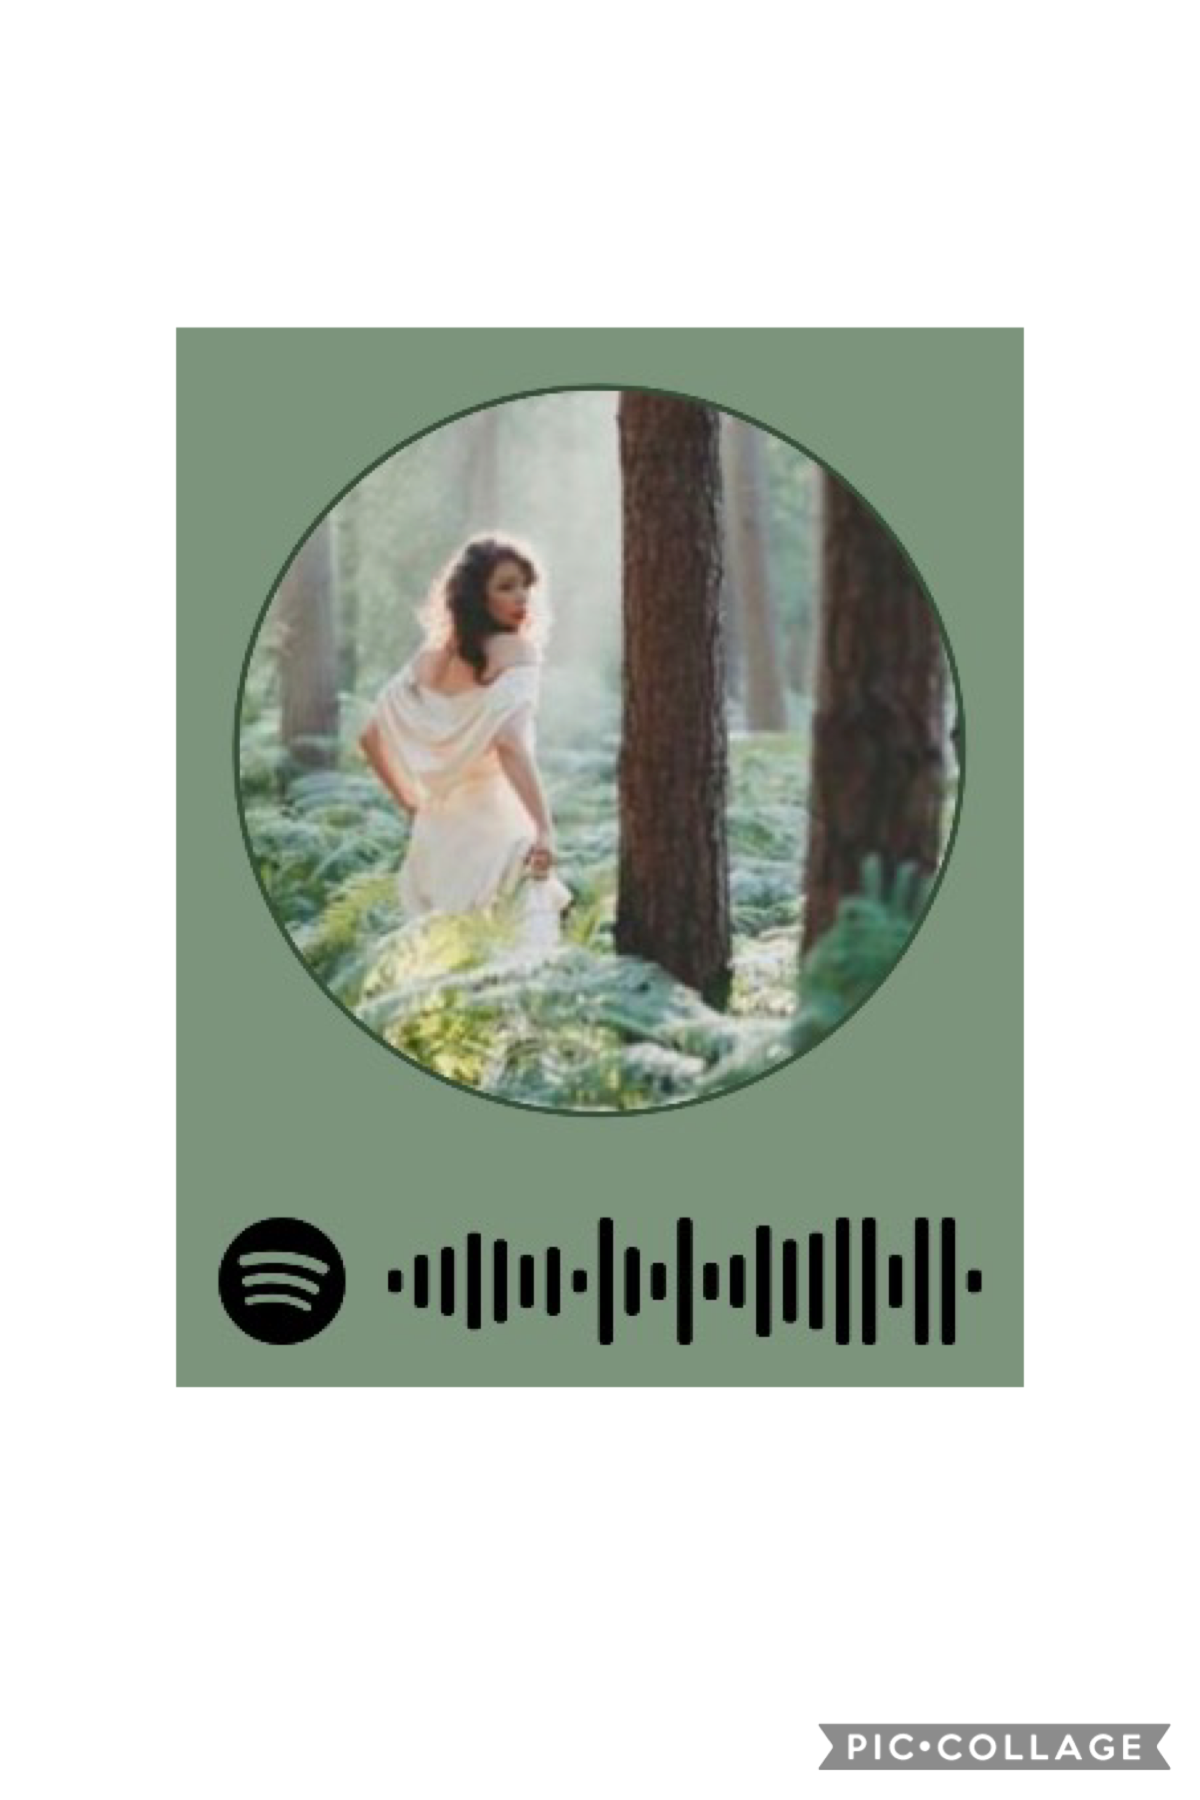 hereeee is the link 2 my spotify profile i make lots of playlists <3 if u want me to follow you back tell me ur username!! 